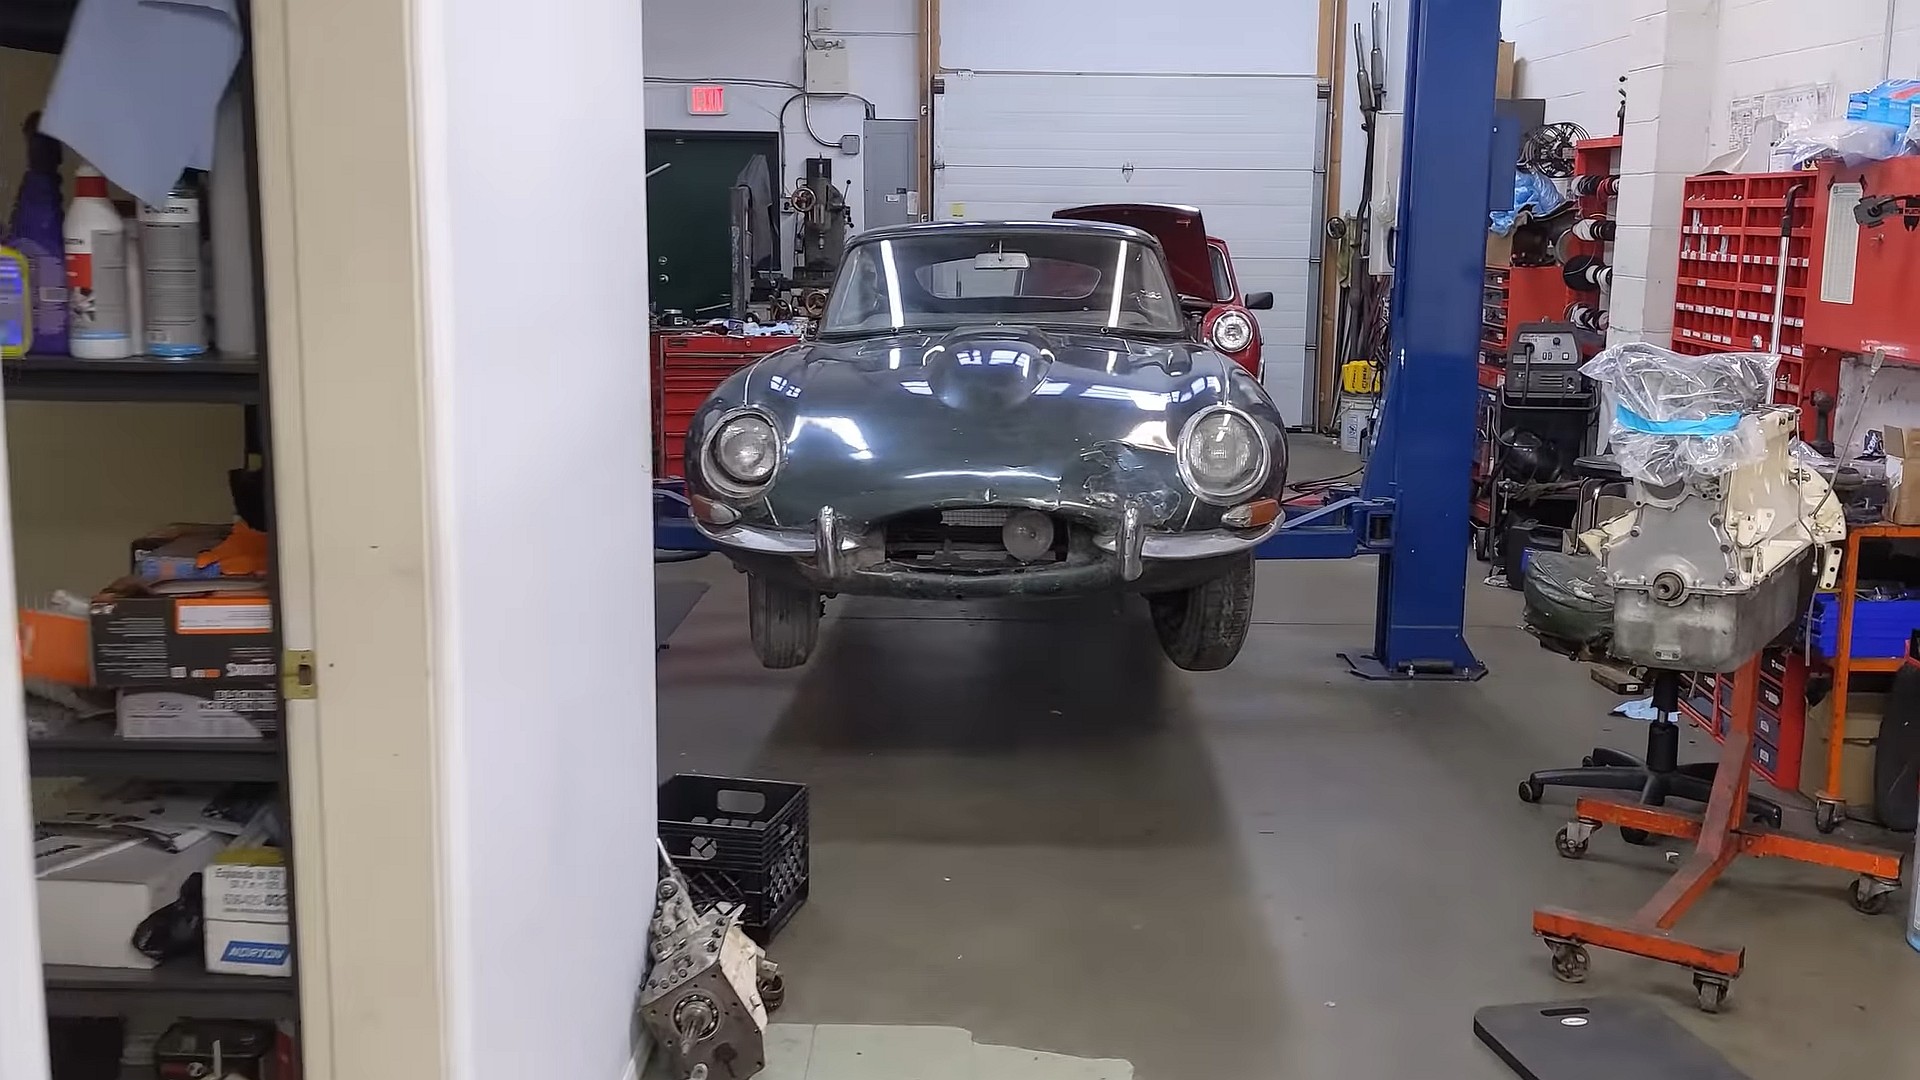 This E-type has the engine from a D-type and lay dormant for 58 years